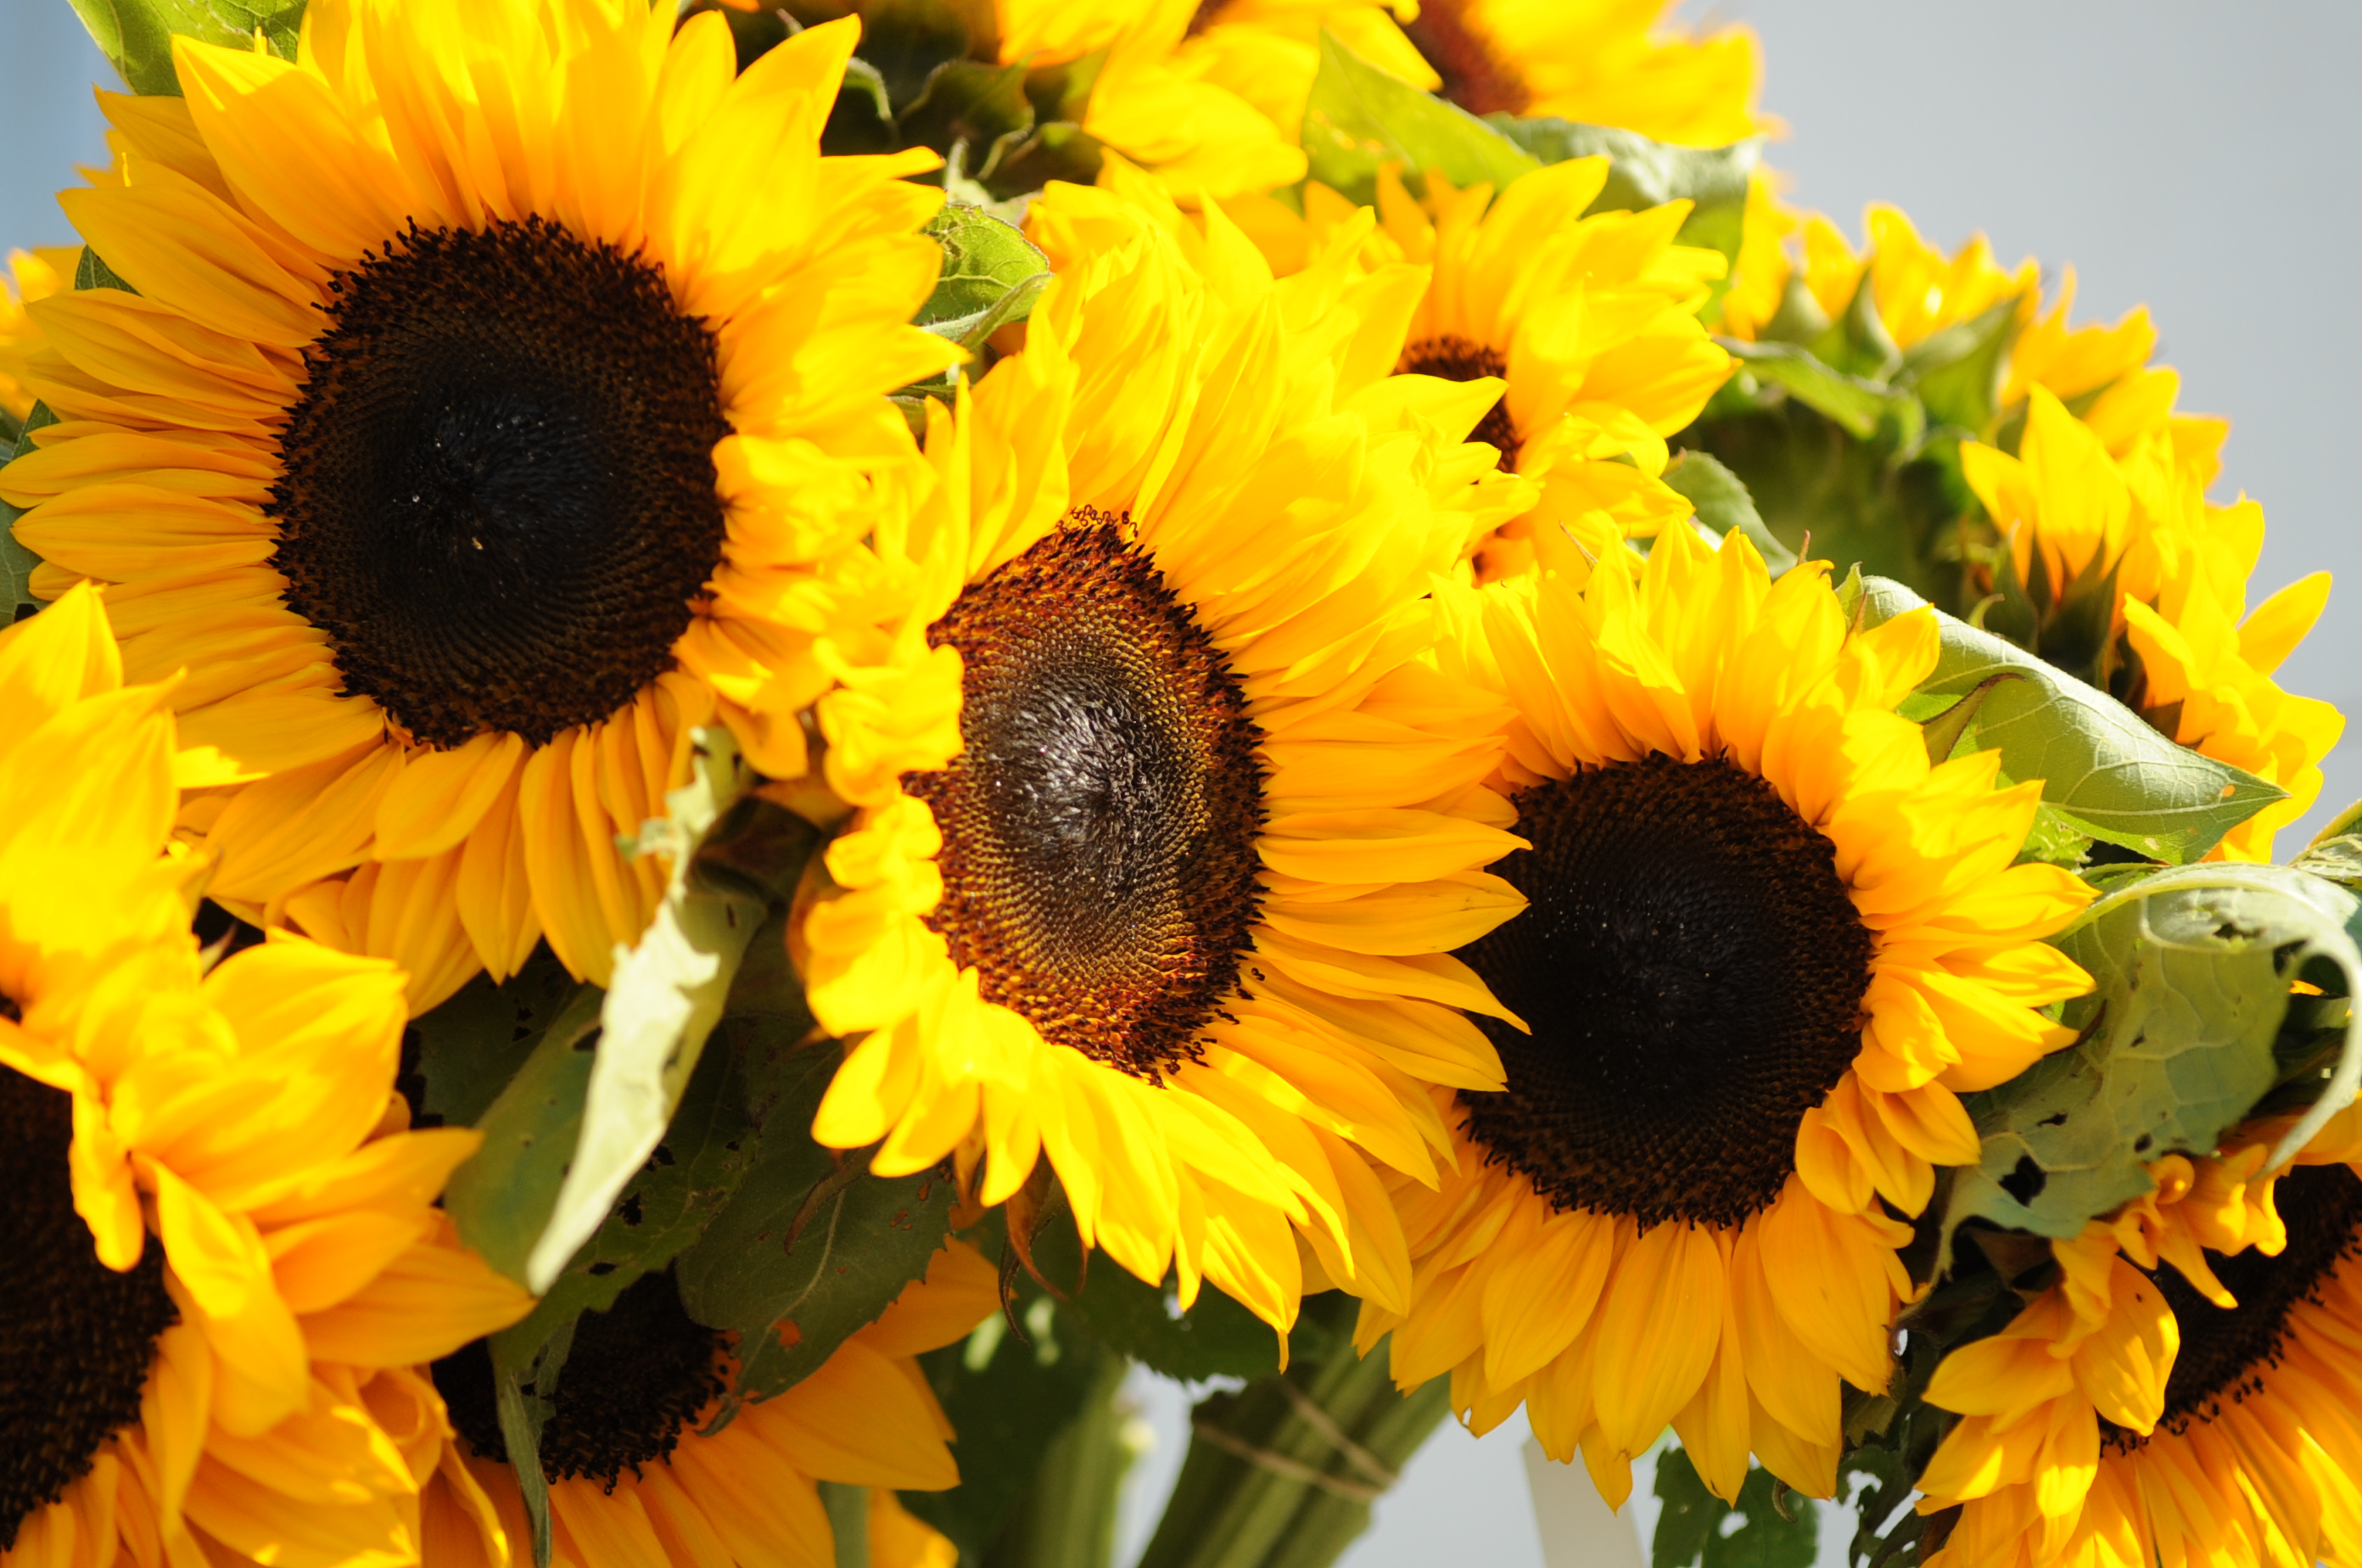 Our own sunflowers |